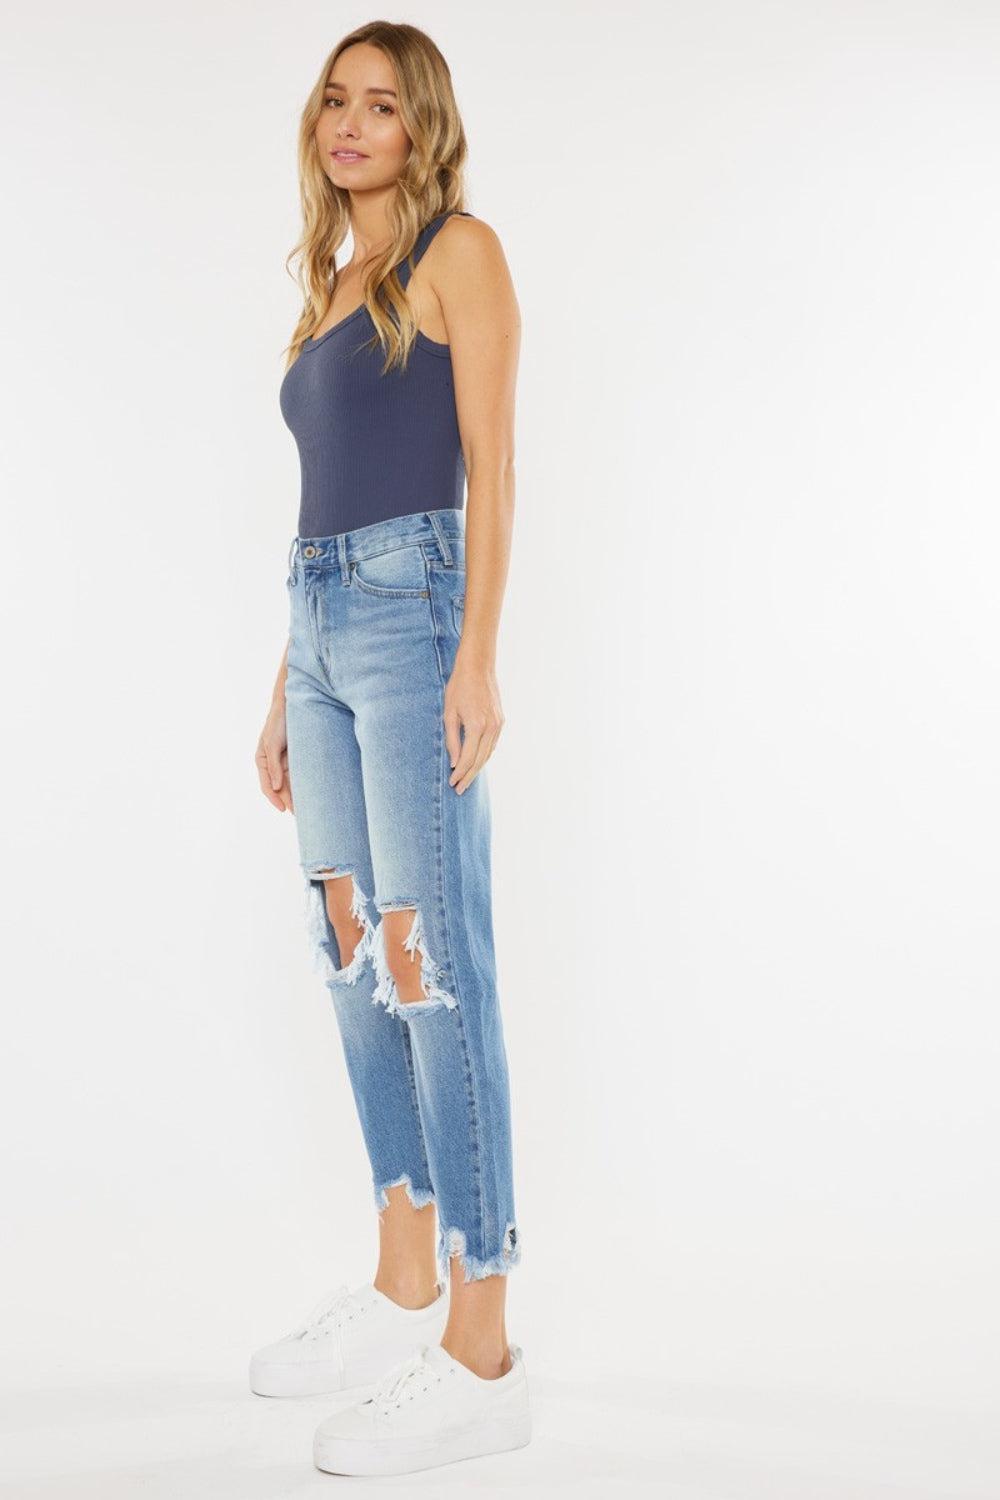 a woman in a tank top and ripped jeans